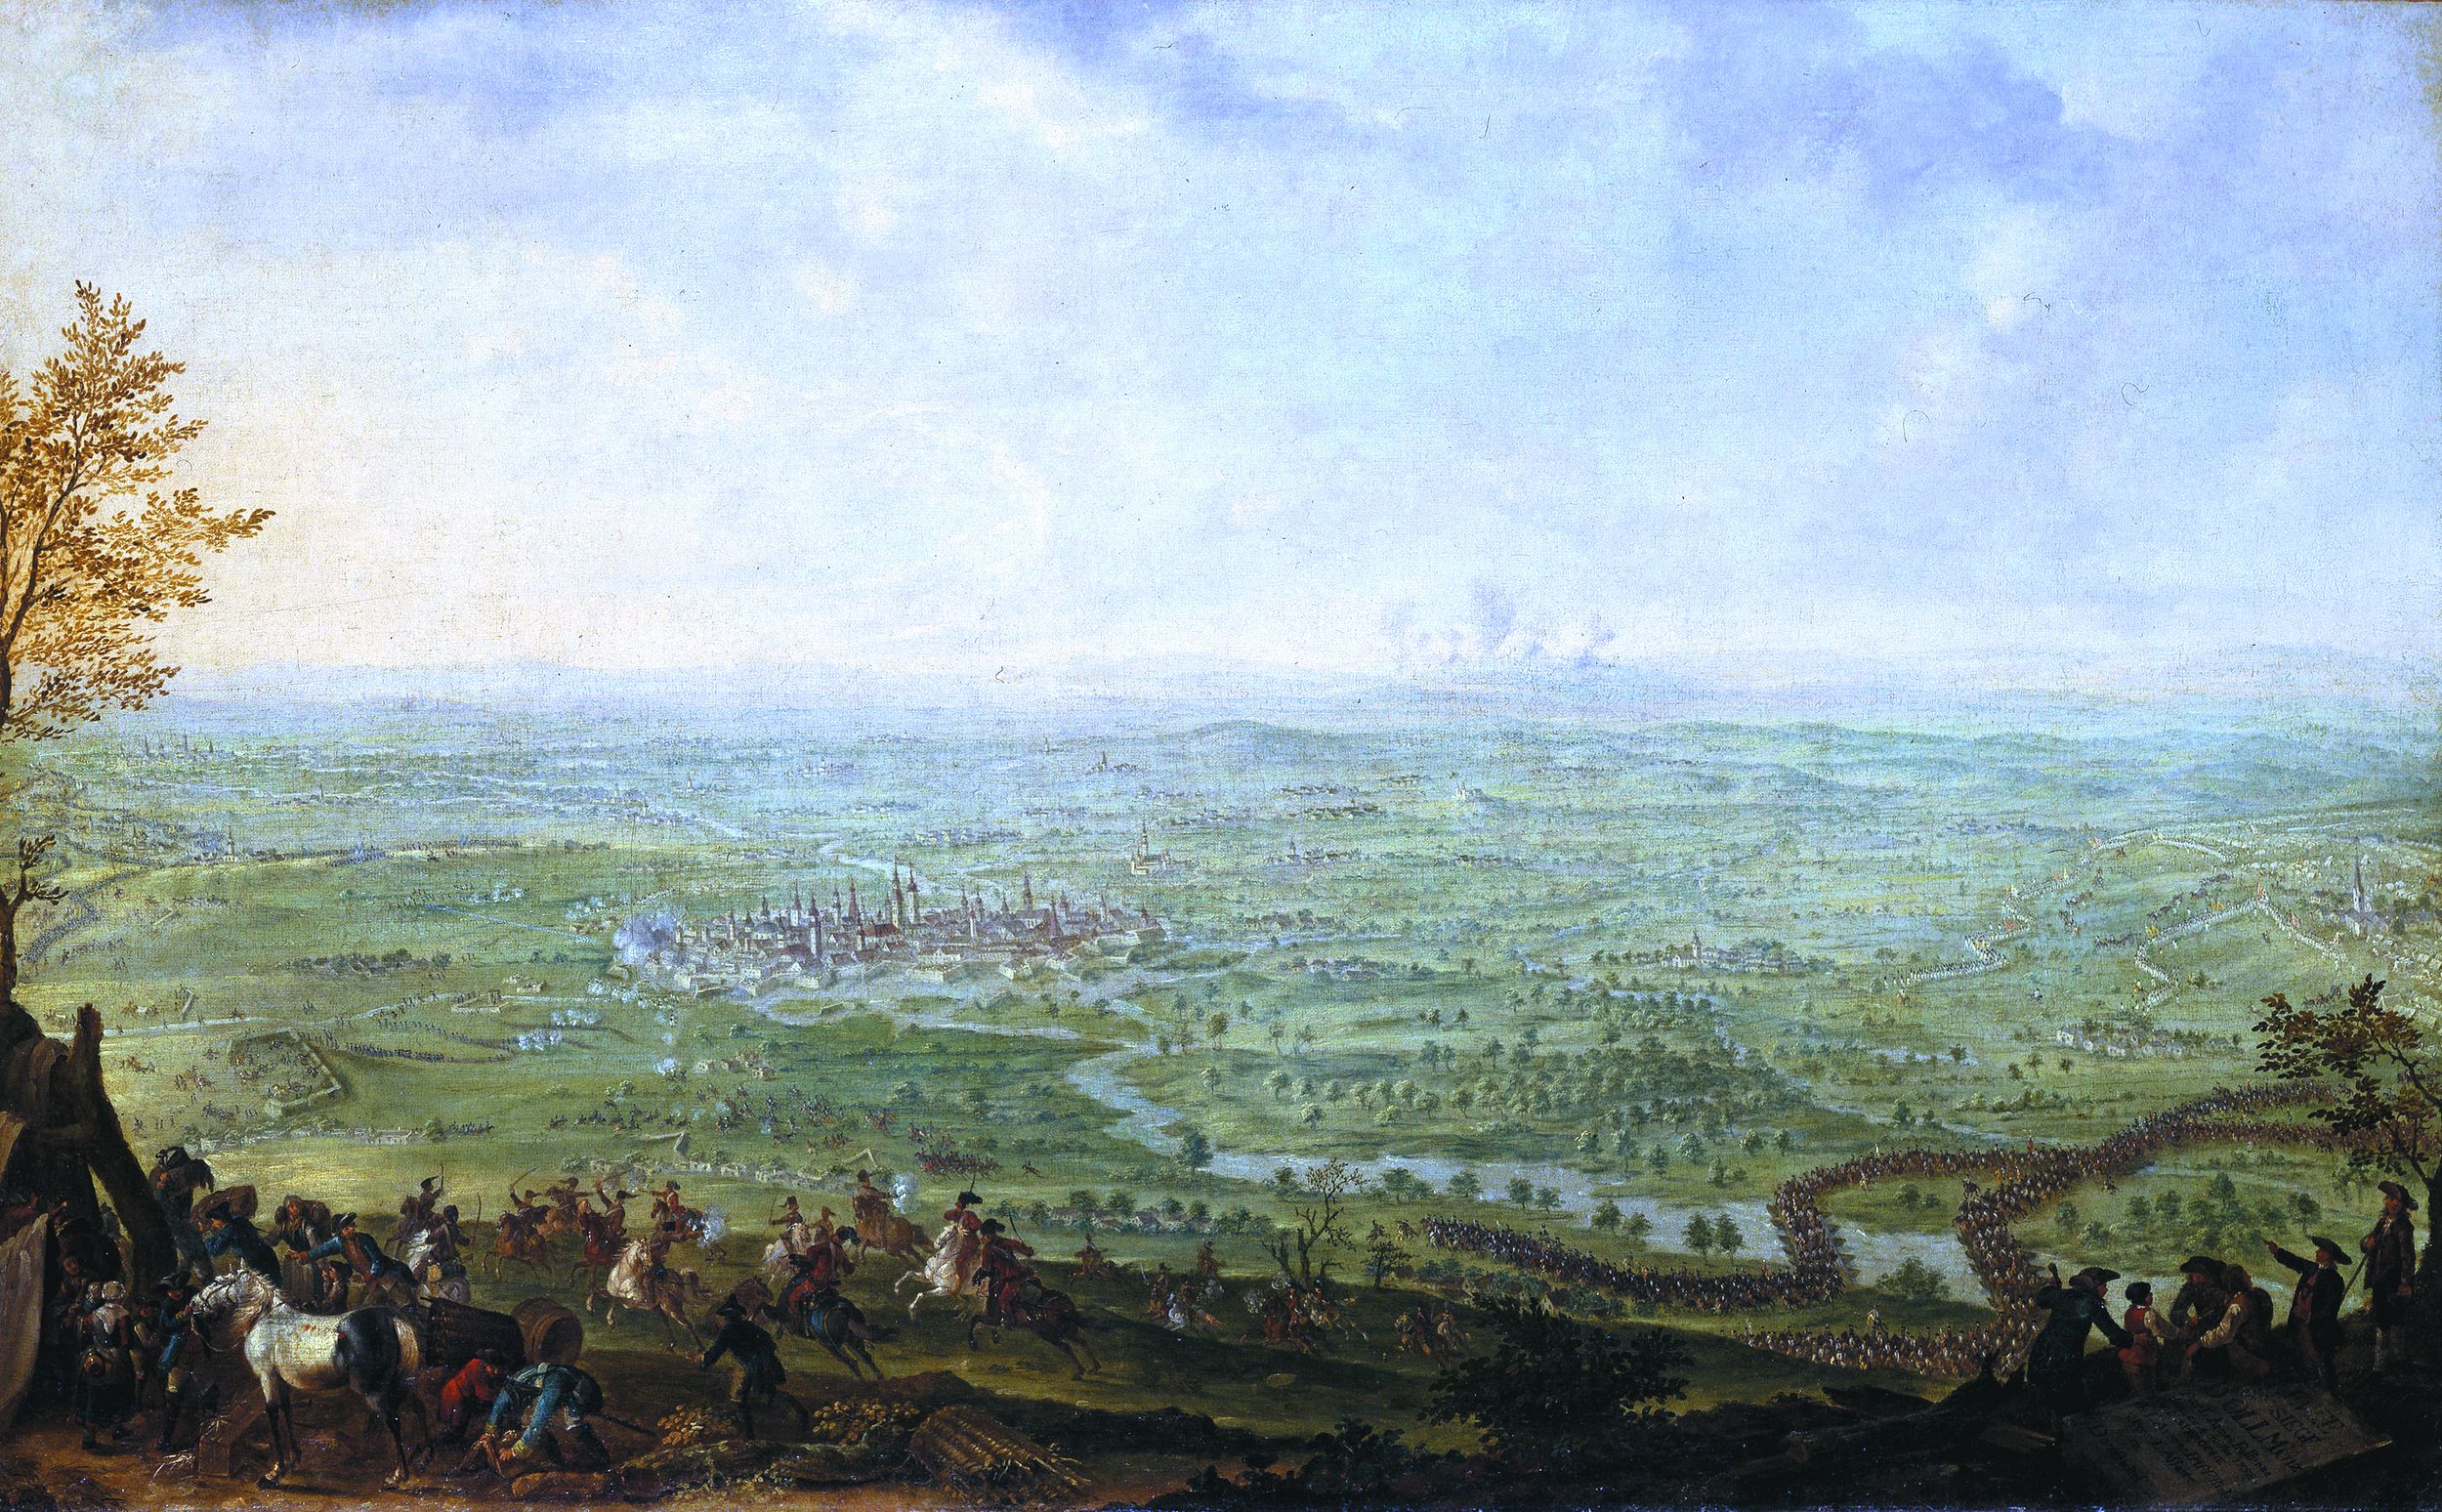 Prussian hussars skirmish with Austrian cuirassiers during the siege of Olmutz. Frederick abandoned the siege on July 2, 1758, and marched north to attack the Russians.